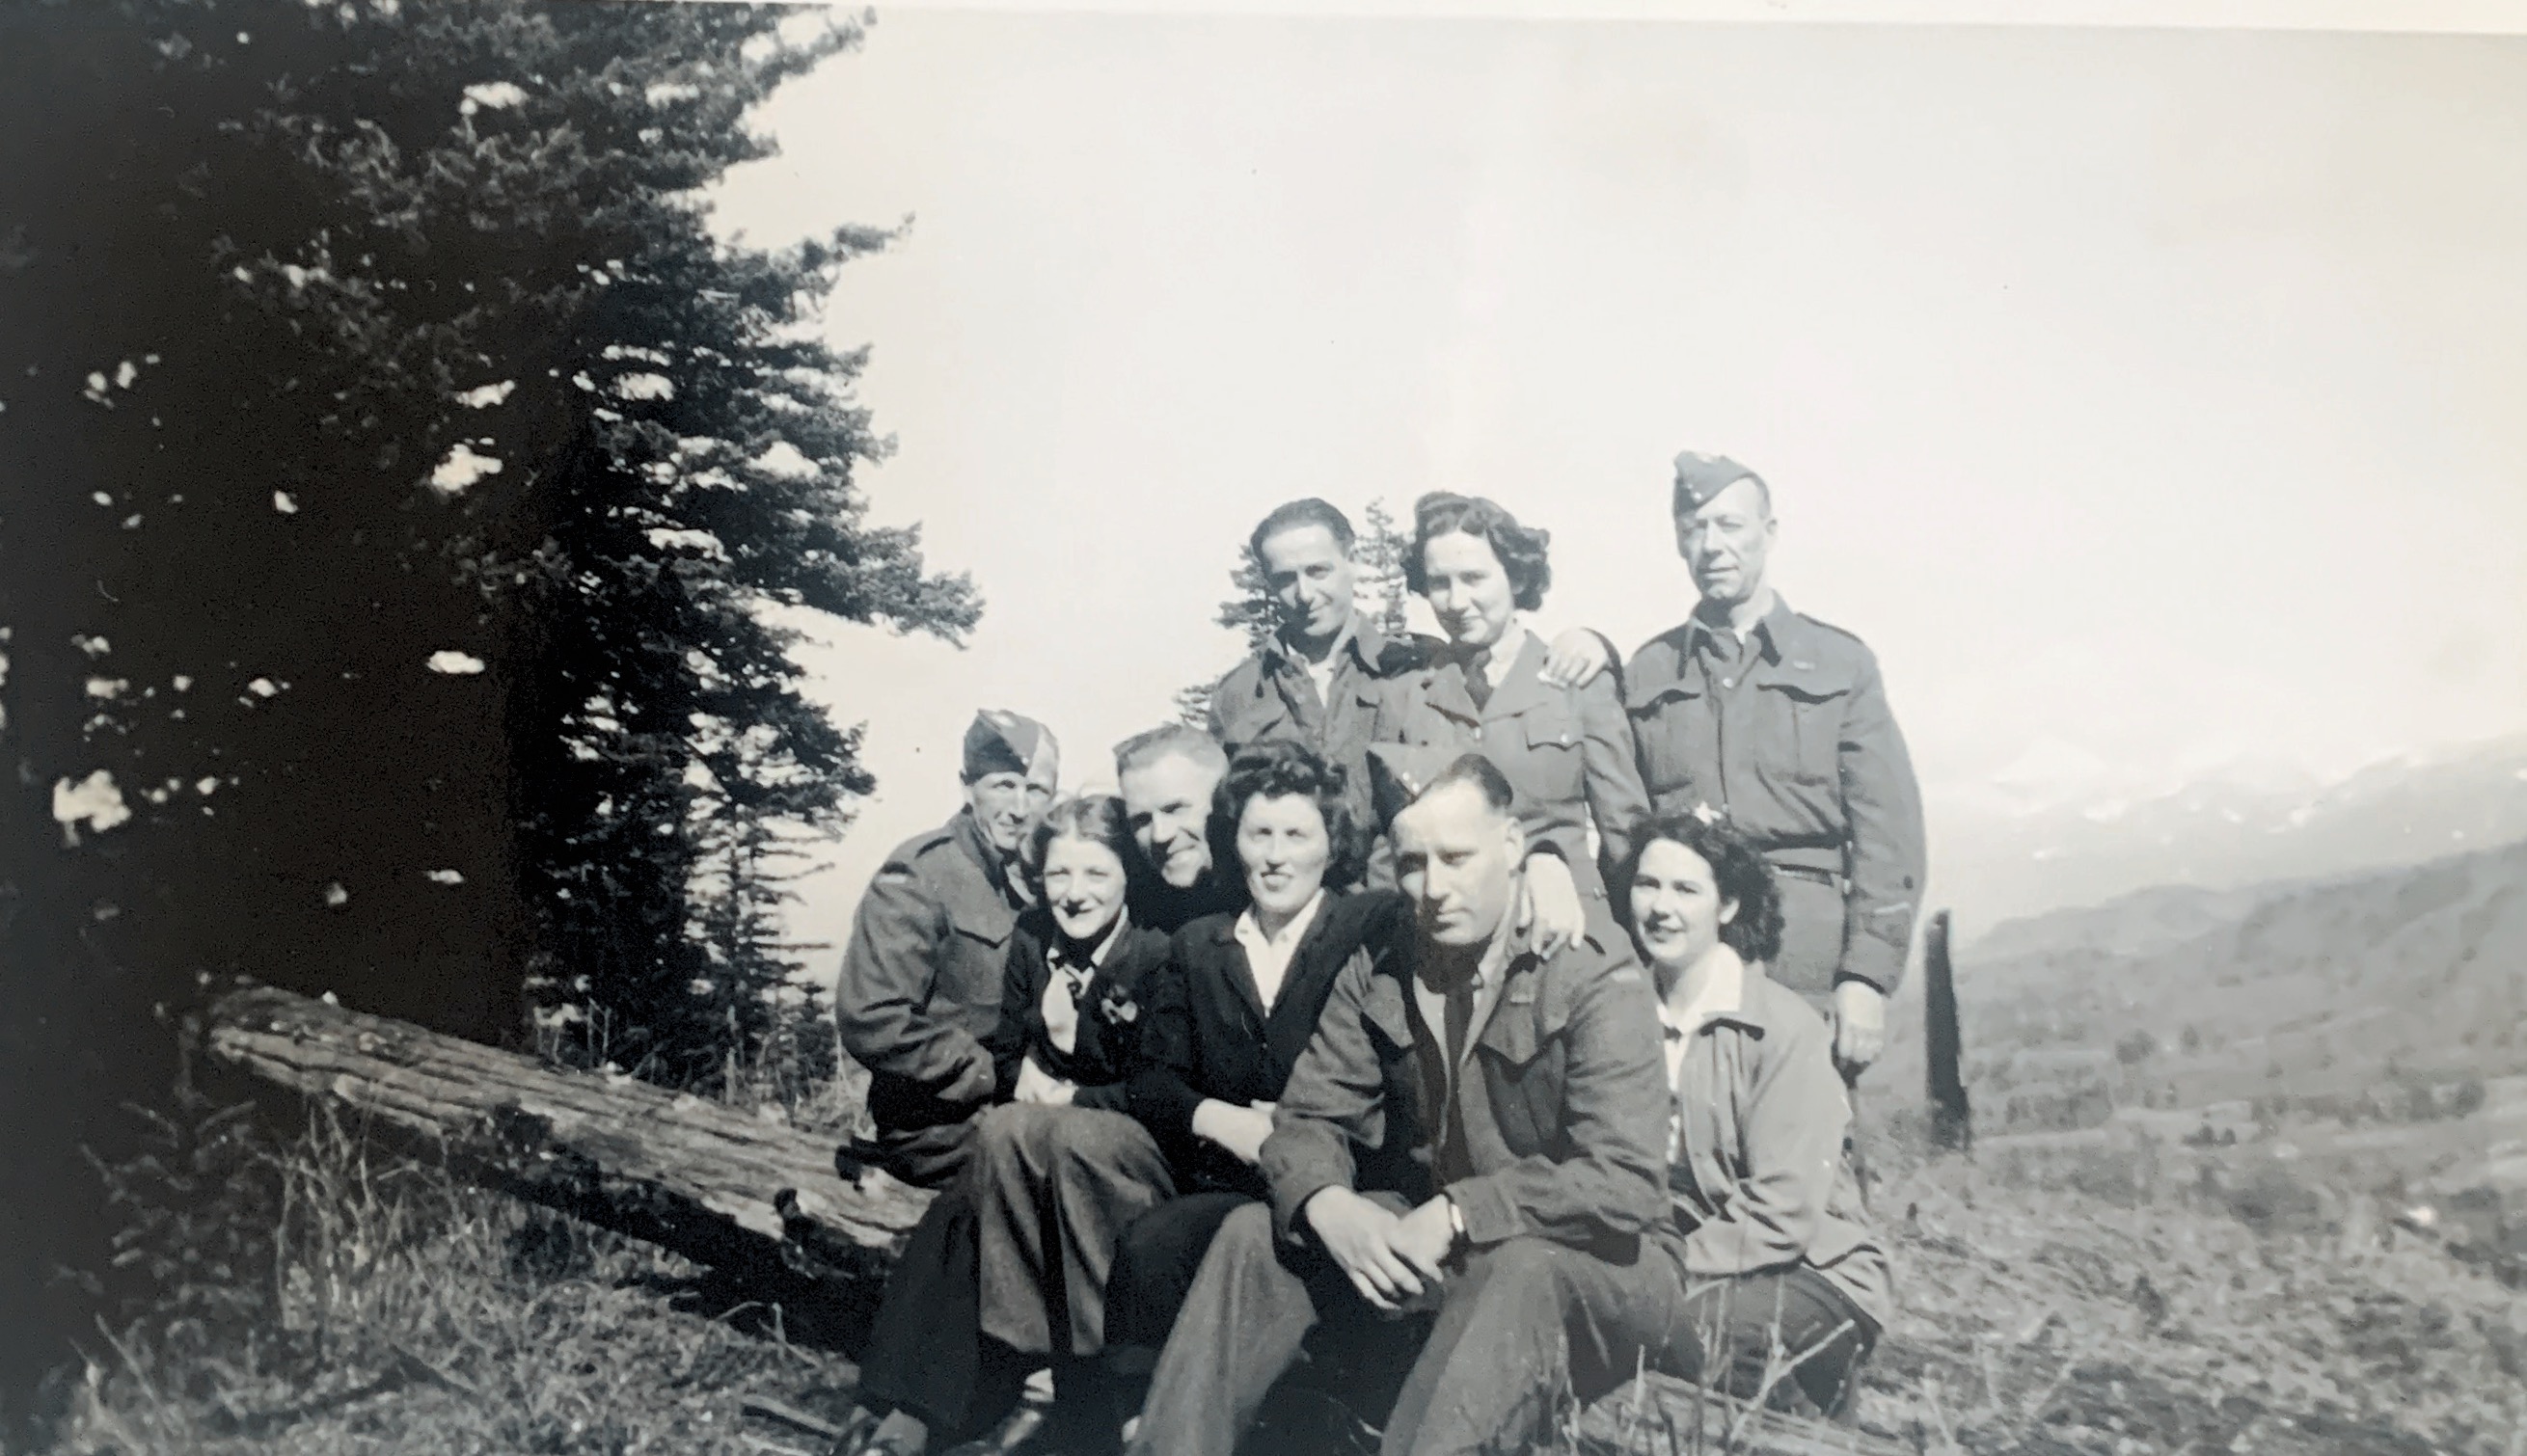 June 1945 Gang up on PJ Hill. “Butch” Stewart was killed on a jeep accident later.